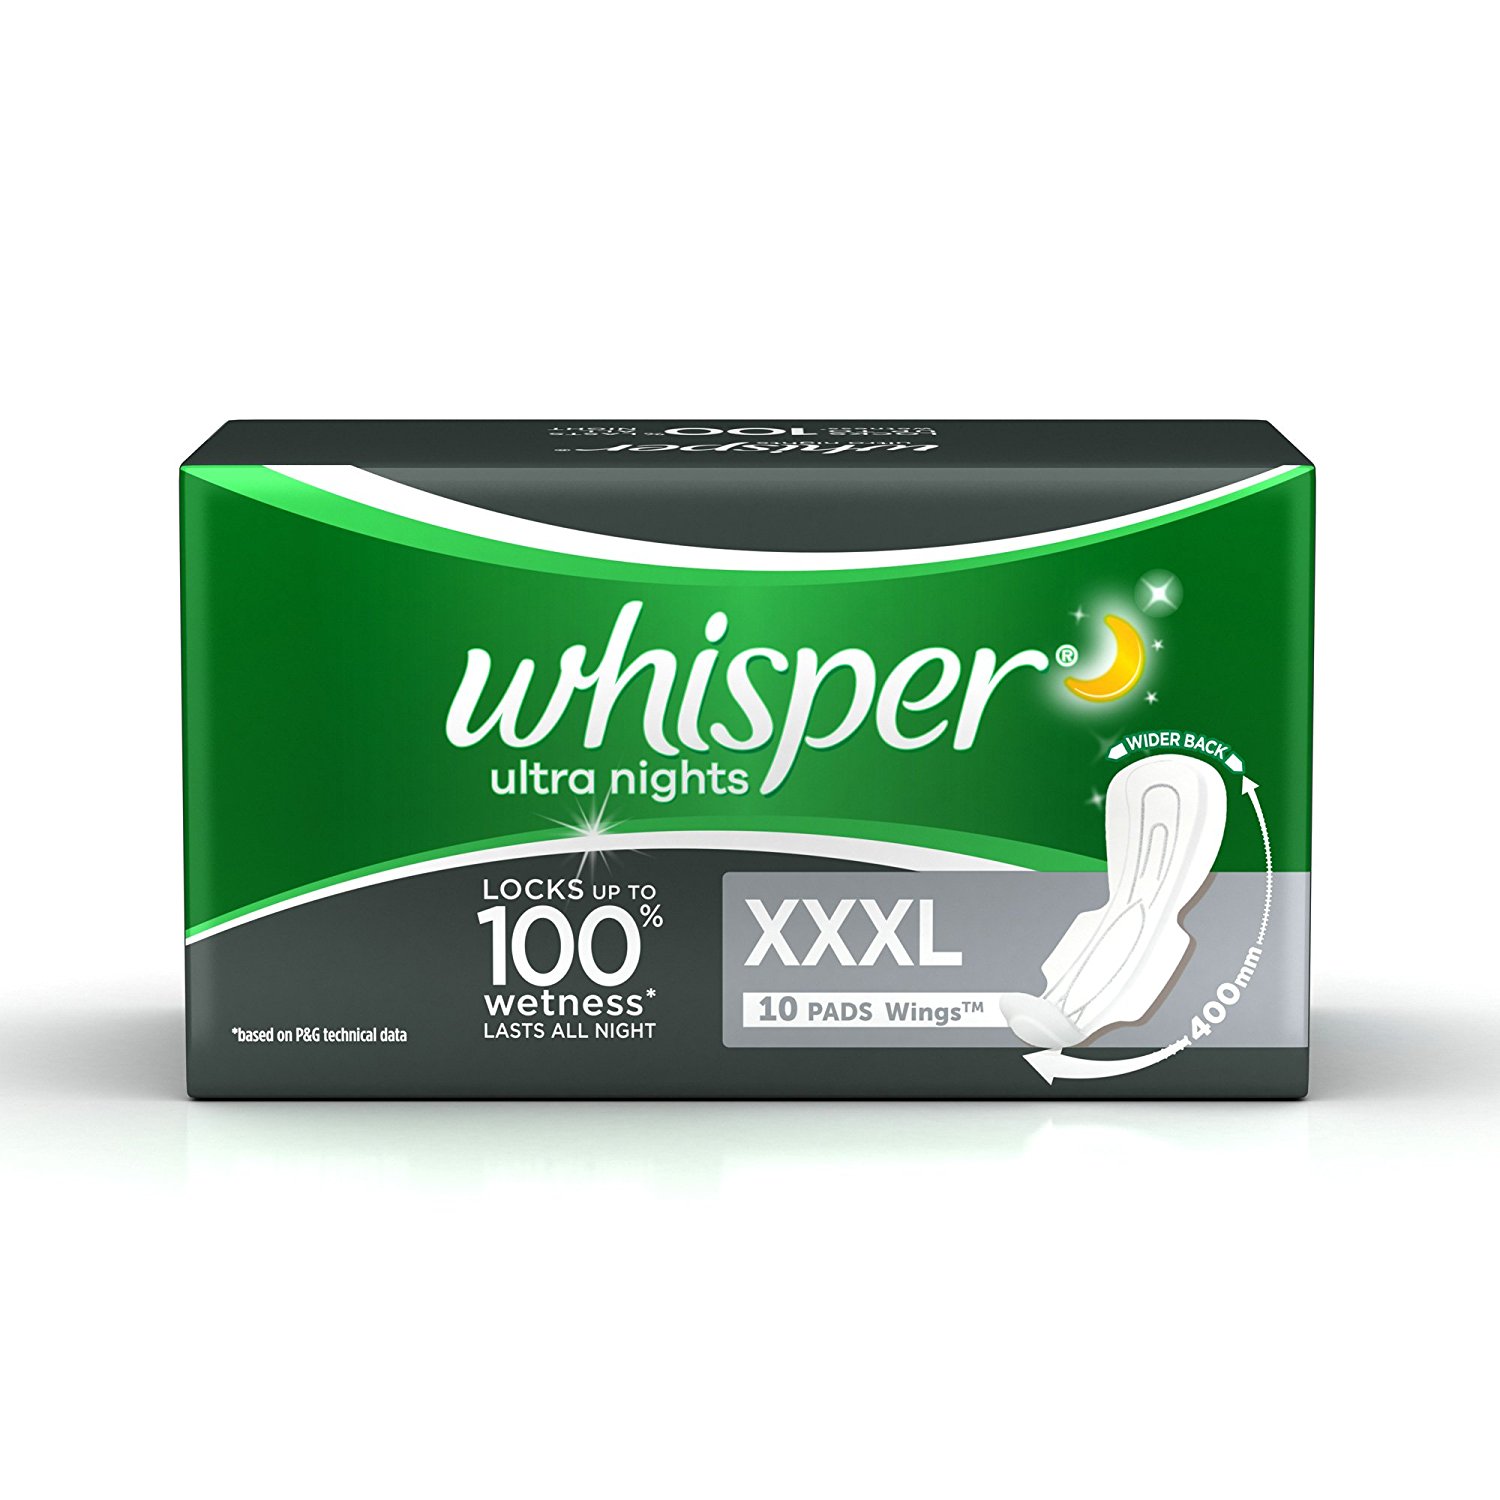 Whisper Ultra Nights Sanitary Pads - XXXL Wings (10 Piece of Pack)